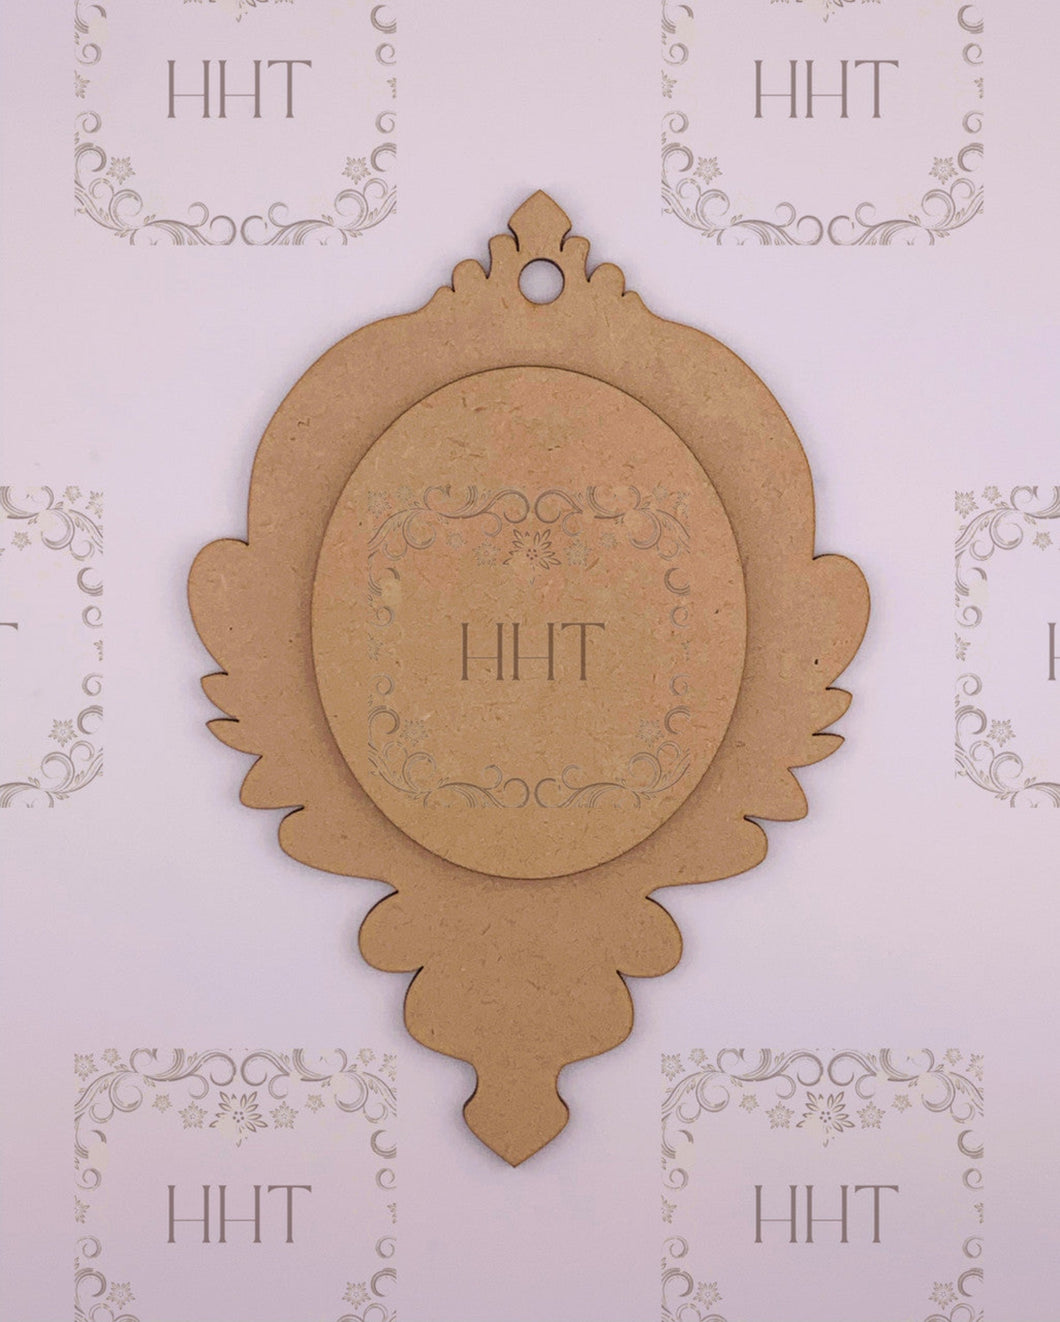 Handcrafted Holiday Traditions MDF Ornament with Overlay Frame, 0011